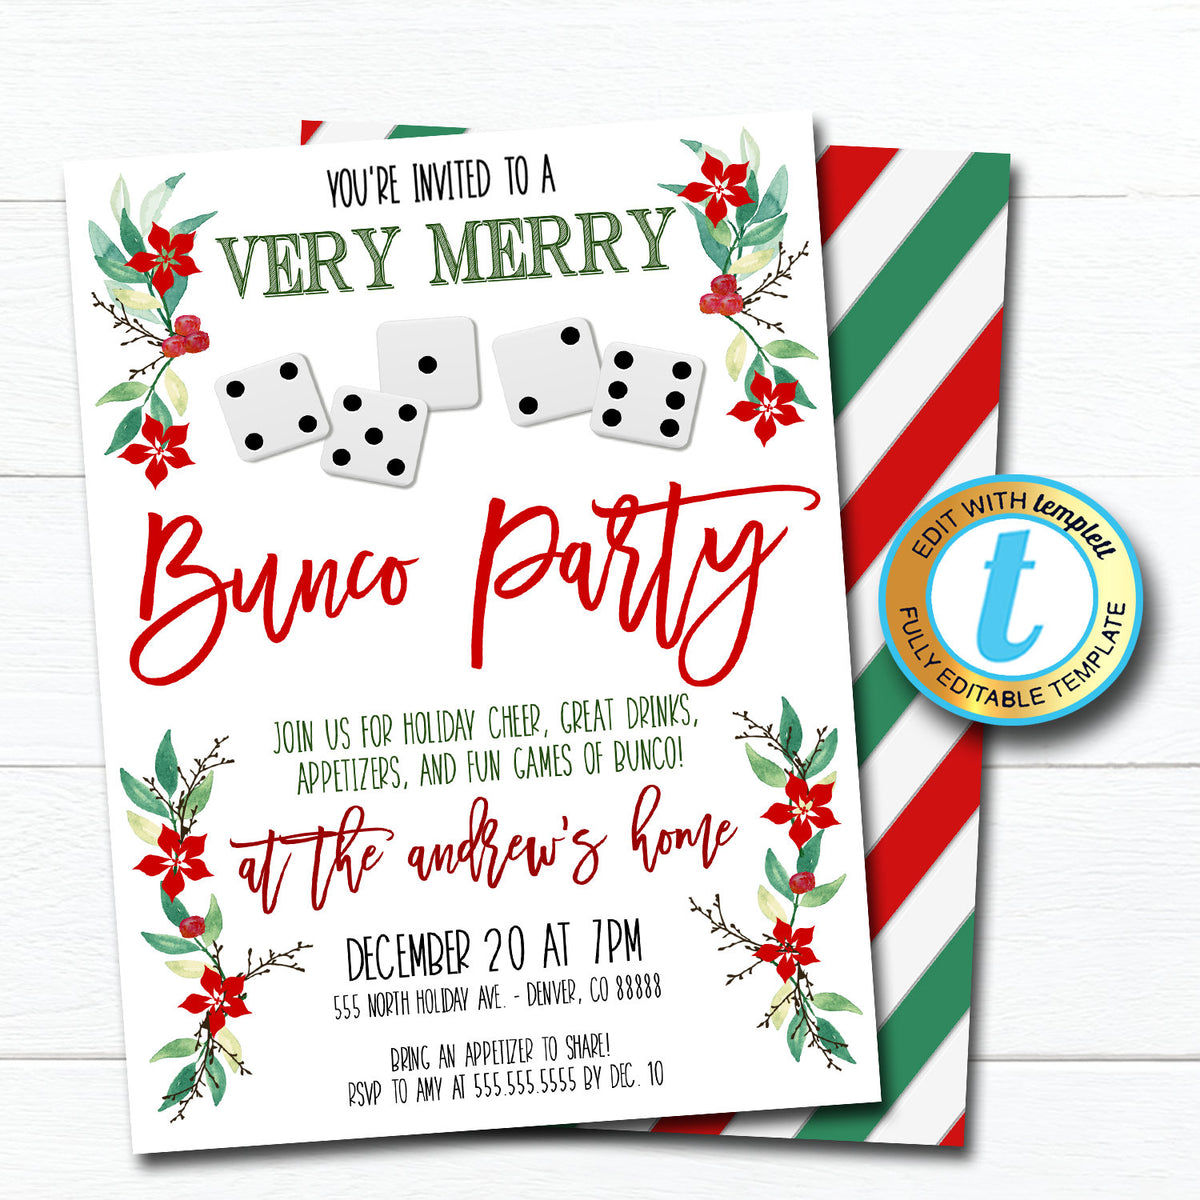 christmas-bunco-party-invite-tidylady-printables